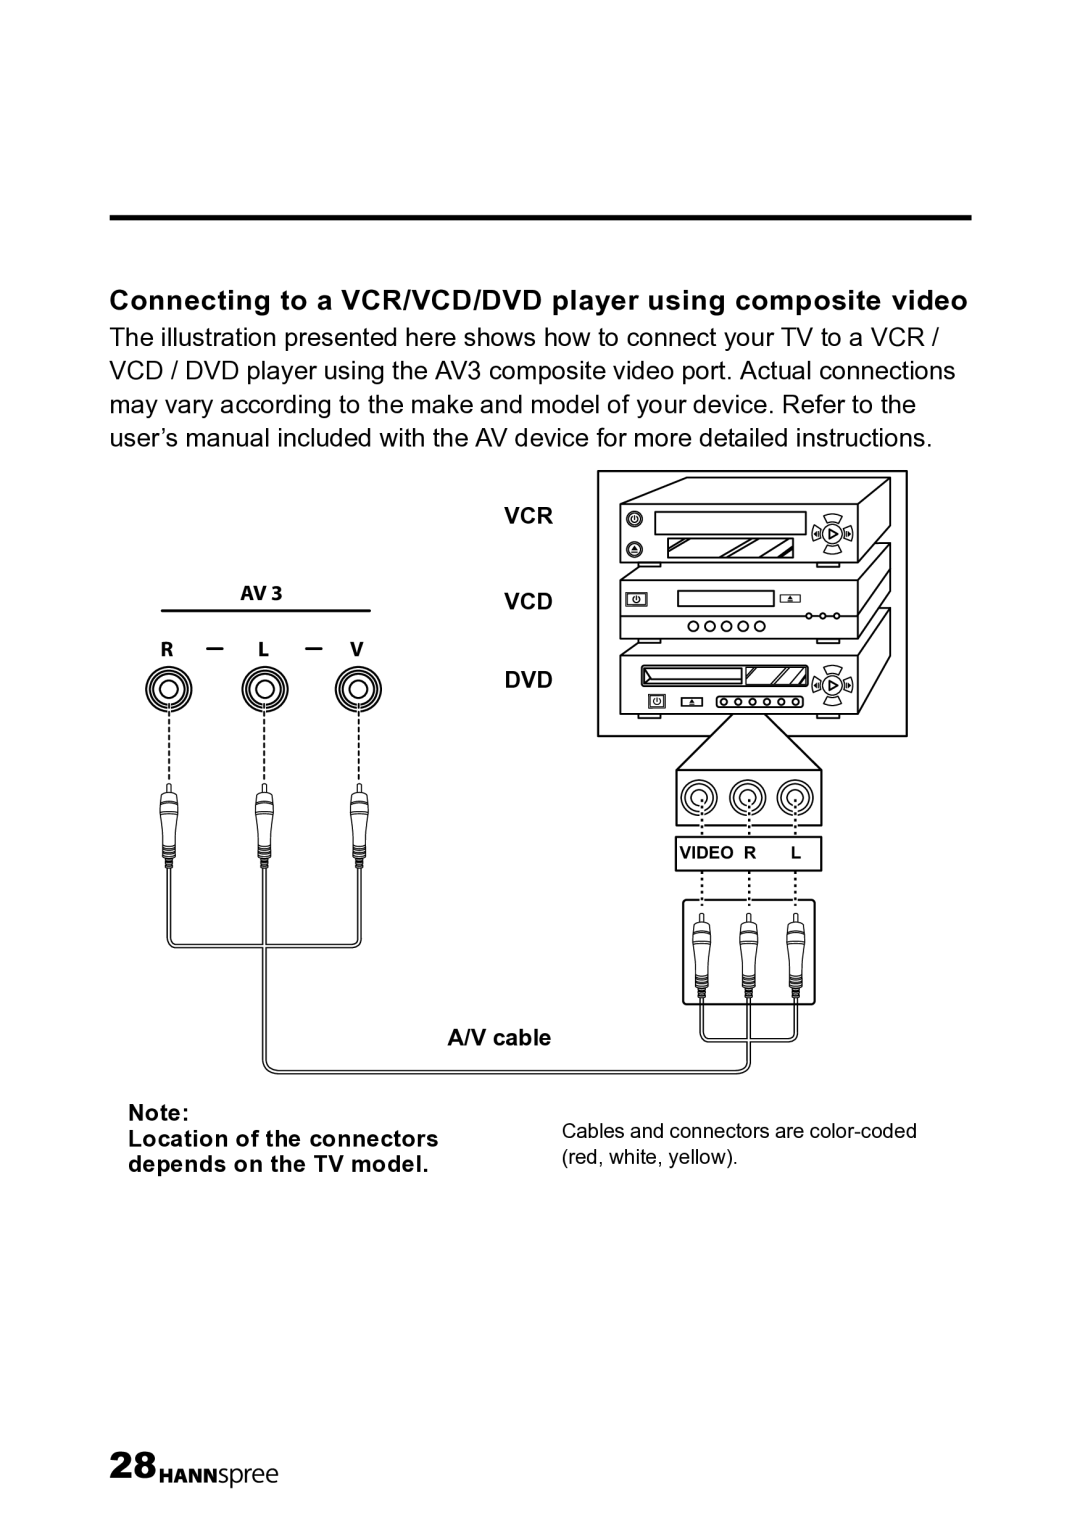 HANNspree LT12-23U1-000 user manual Connecting to a VCR/VCD/DVD player using composite video 